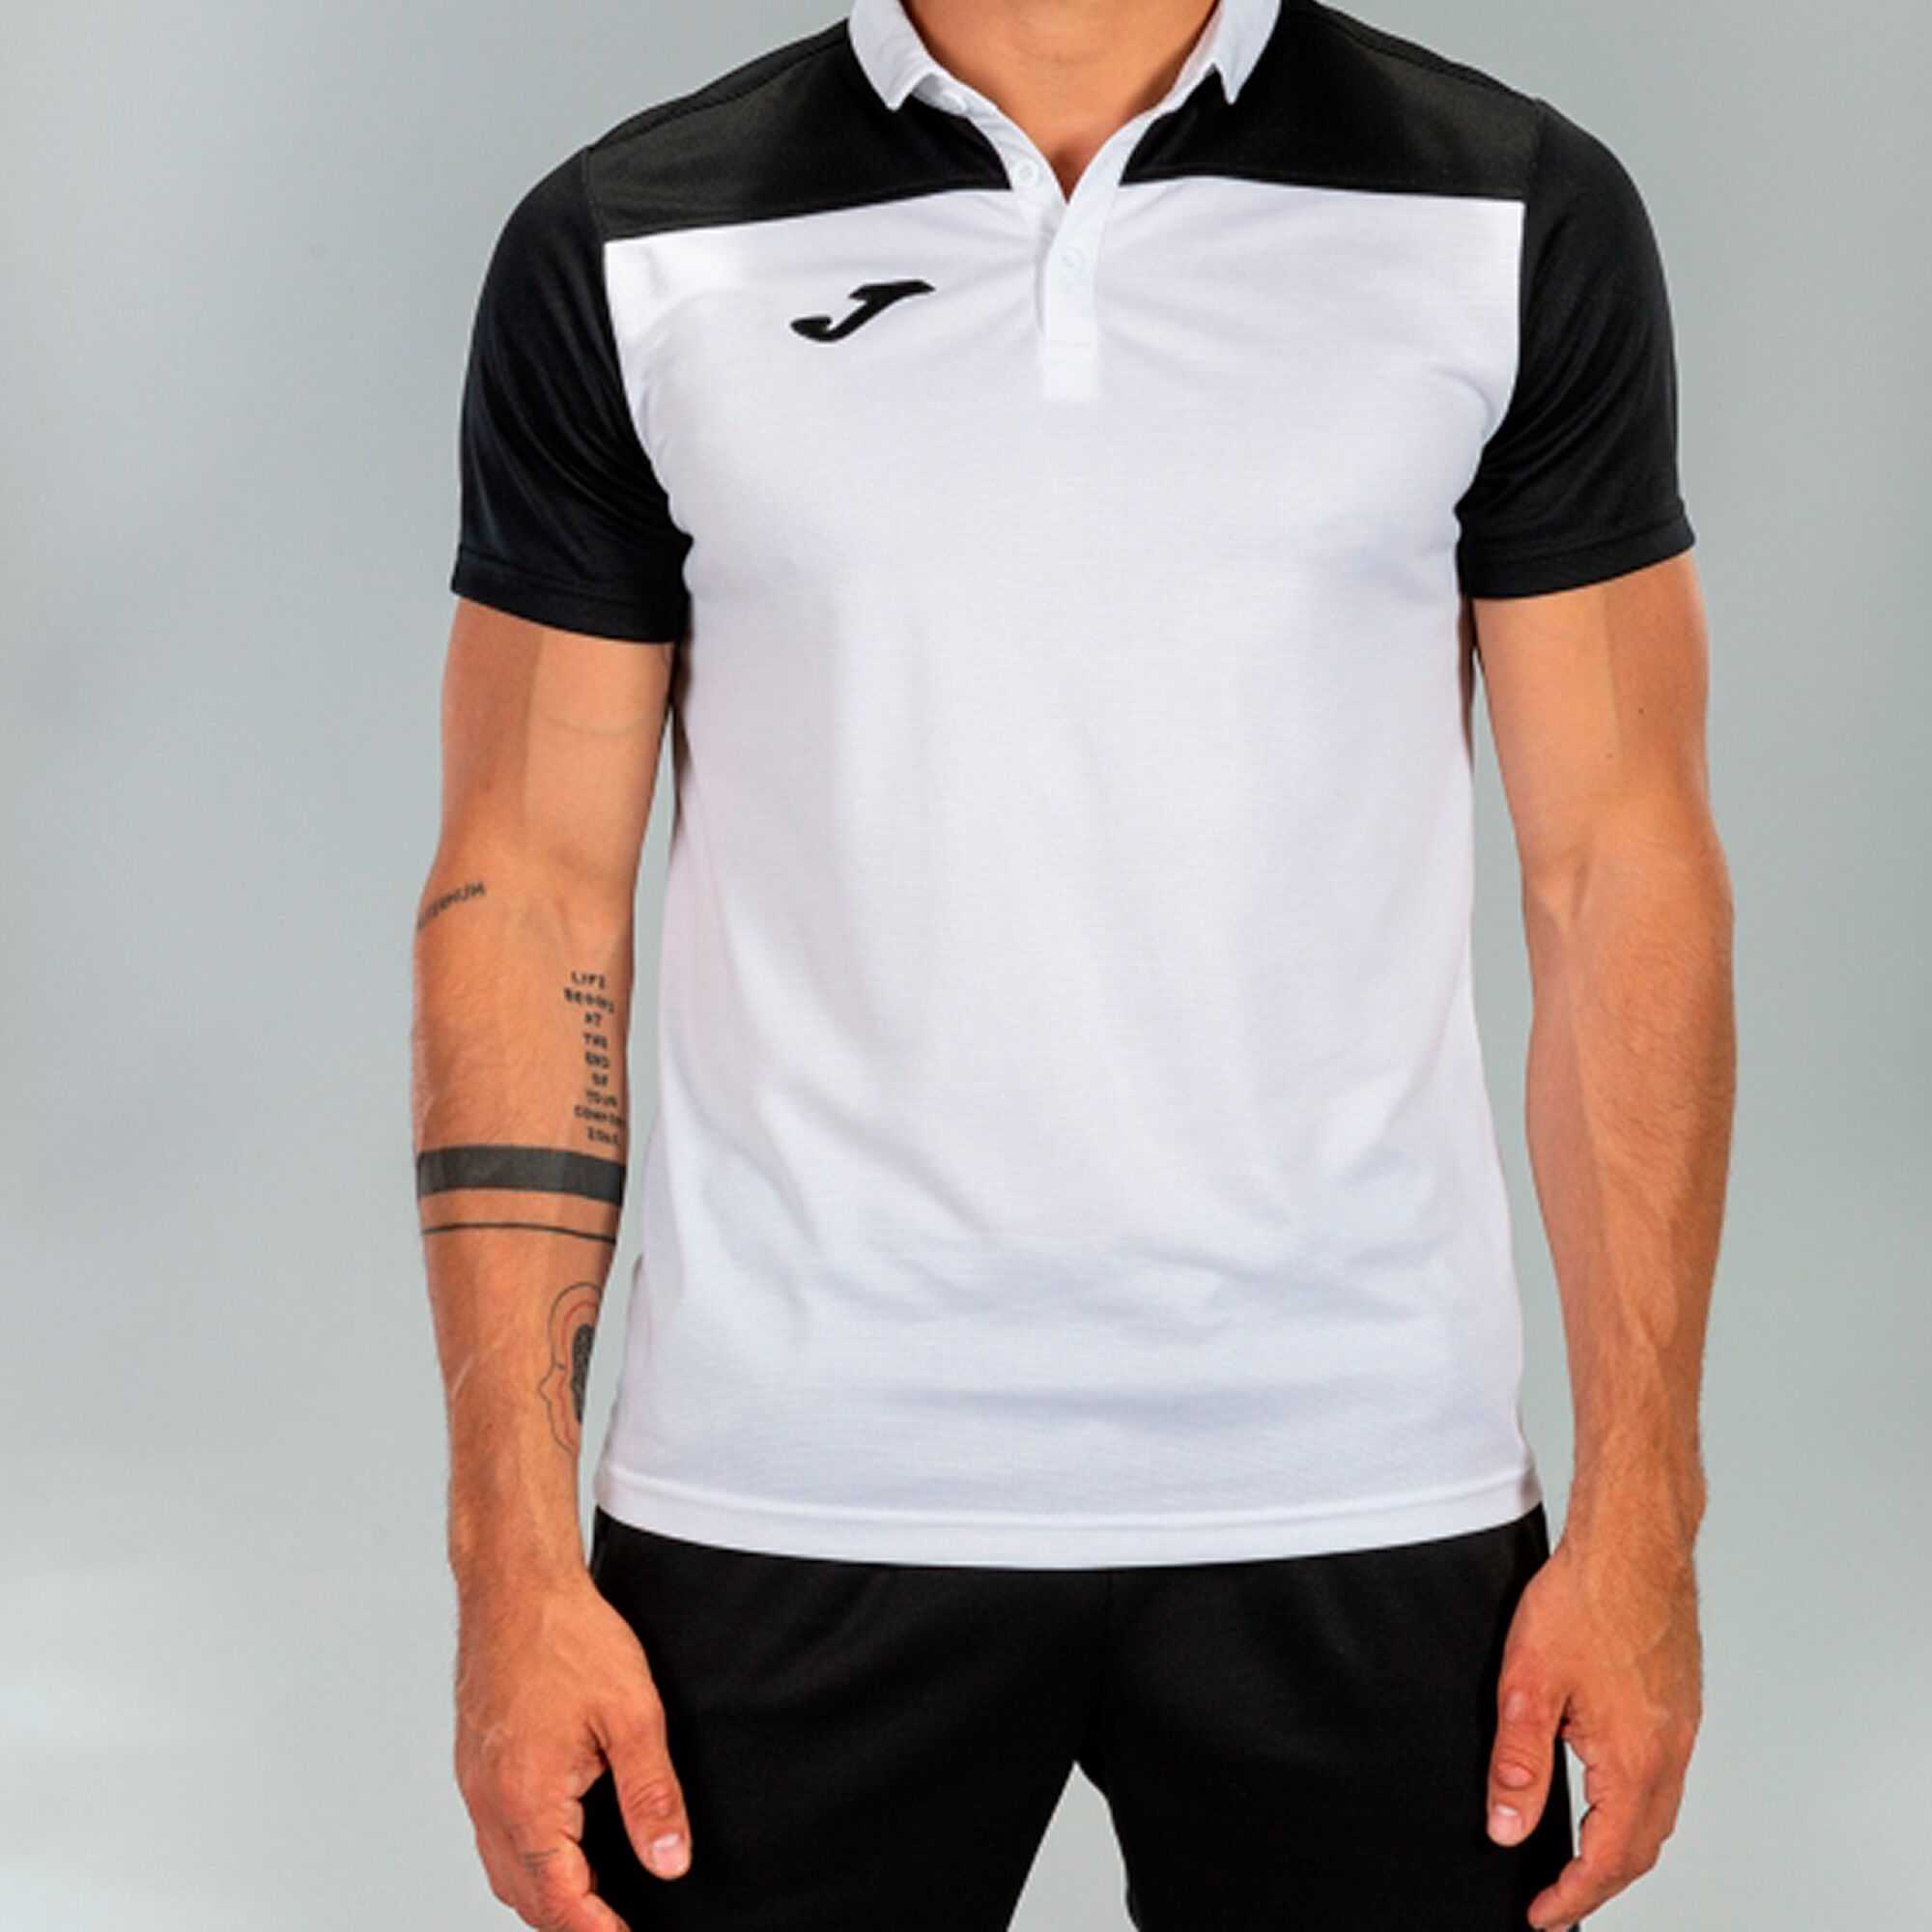 POLO MANCHES COURTES HOMME HOBBY II BLANC NOIR